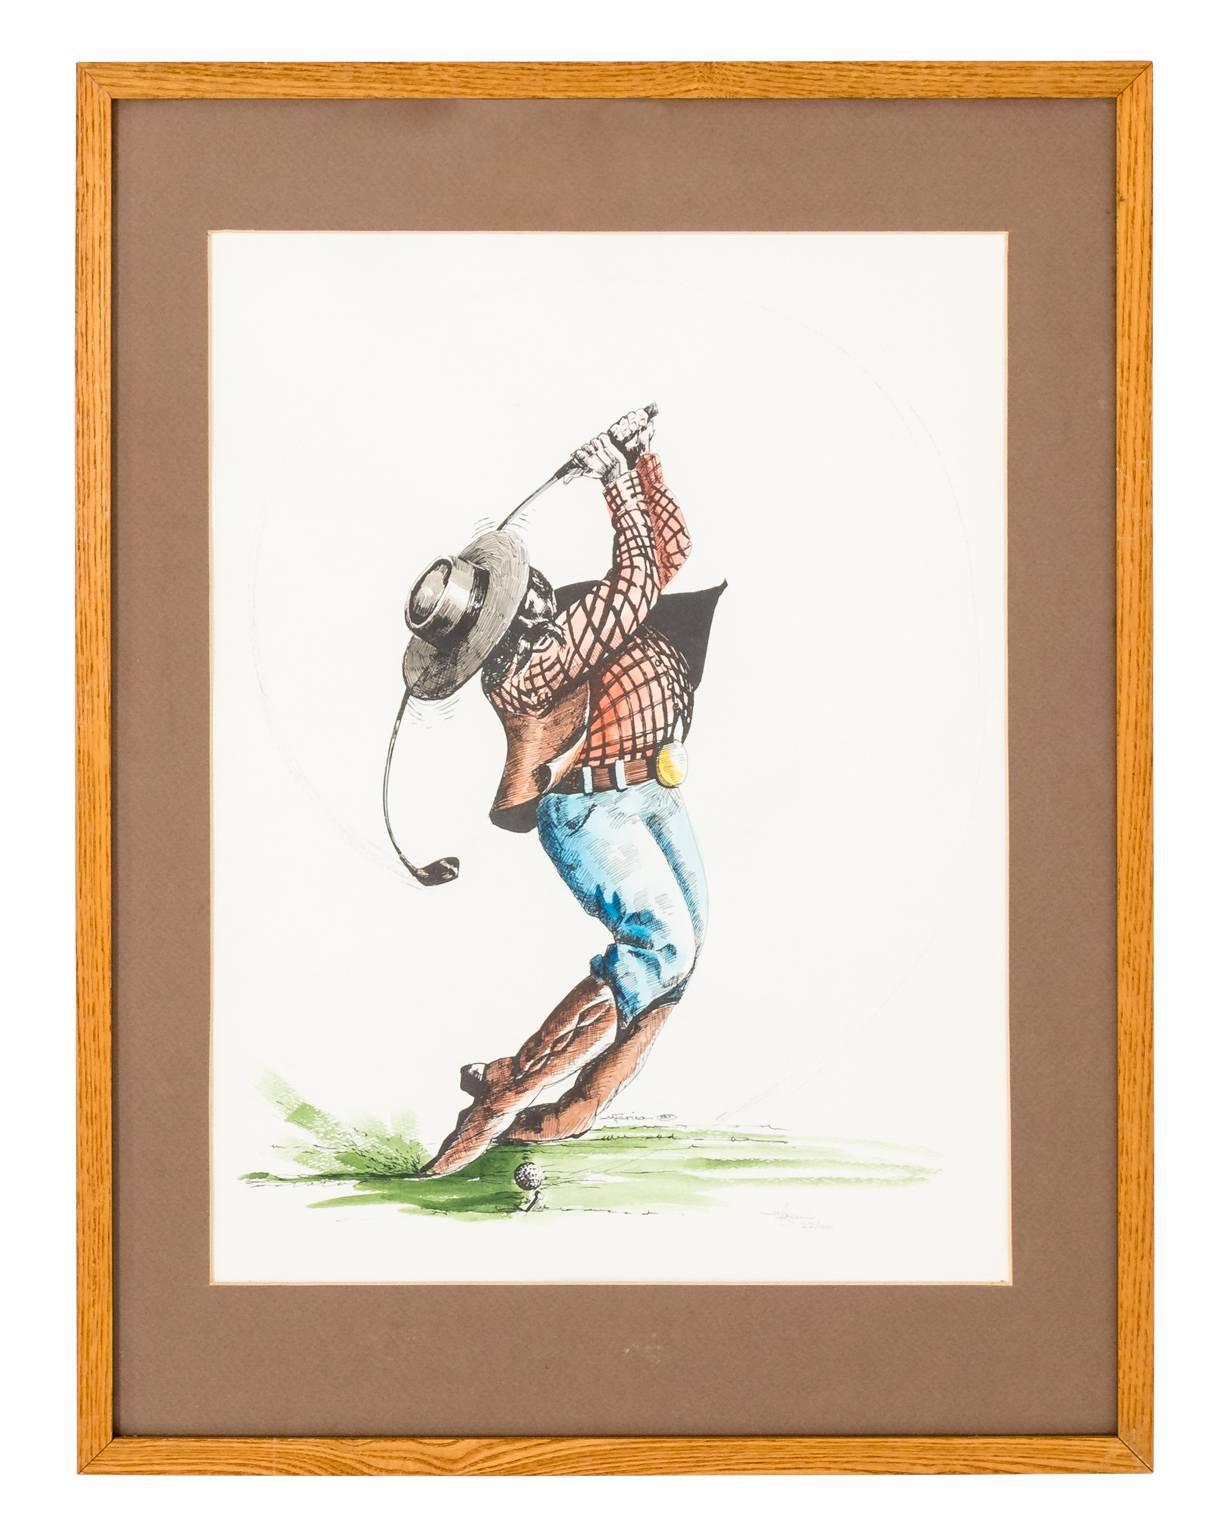 Contemporary pair of signed Bobby McFarin cowboy golfer prints #14/110 and #22/100 in custom frame and matting.
 